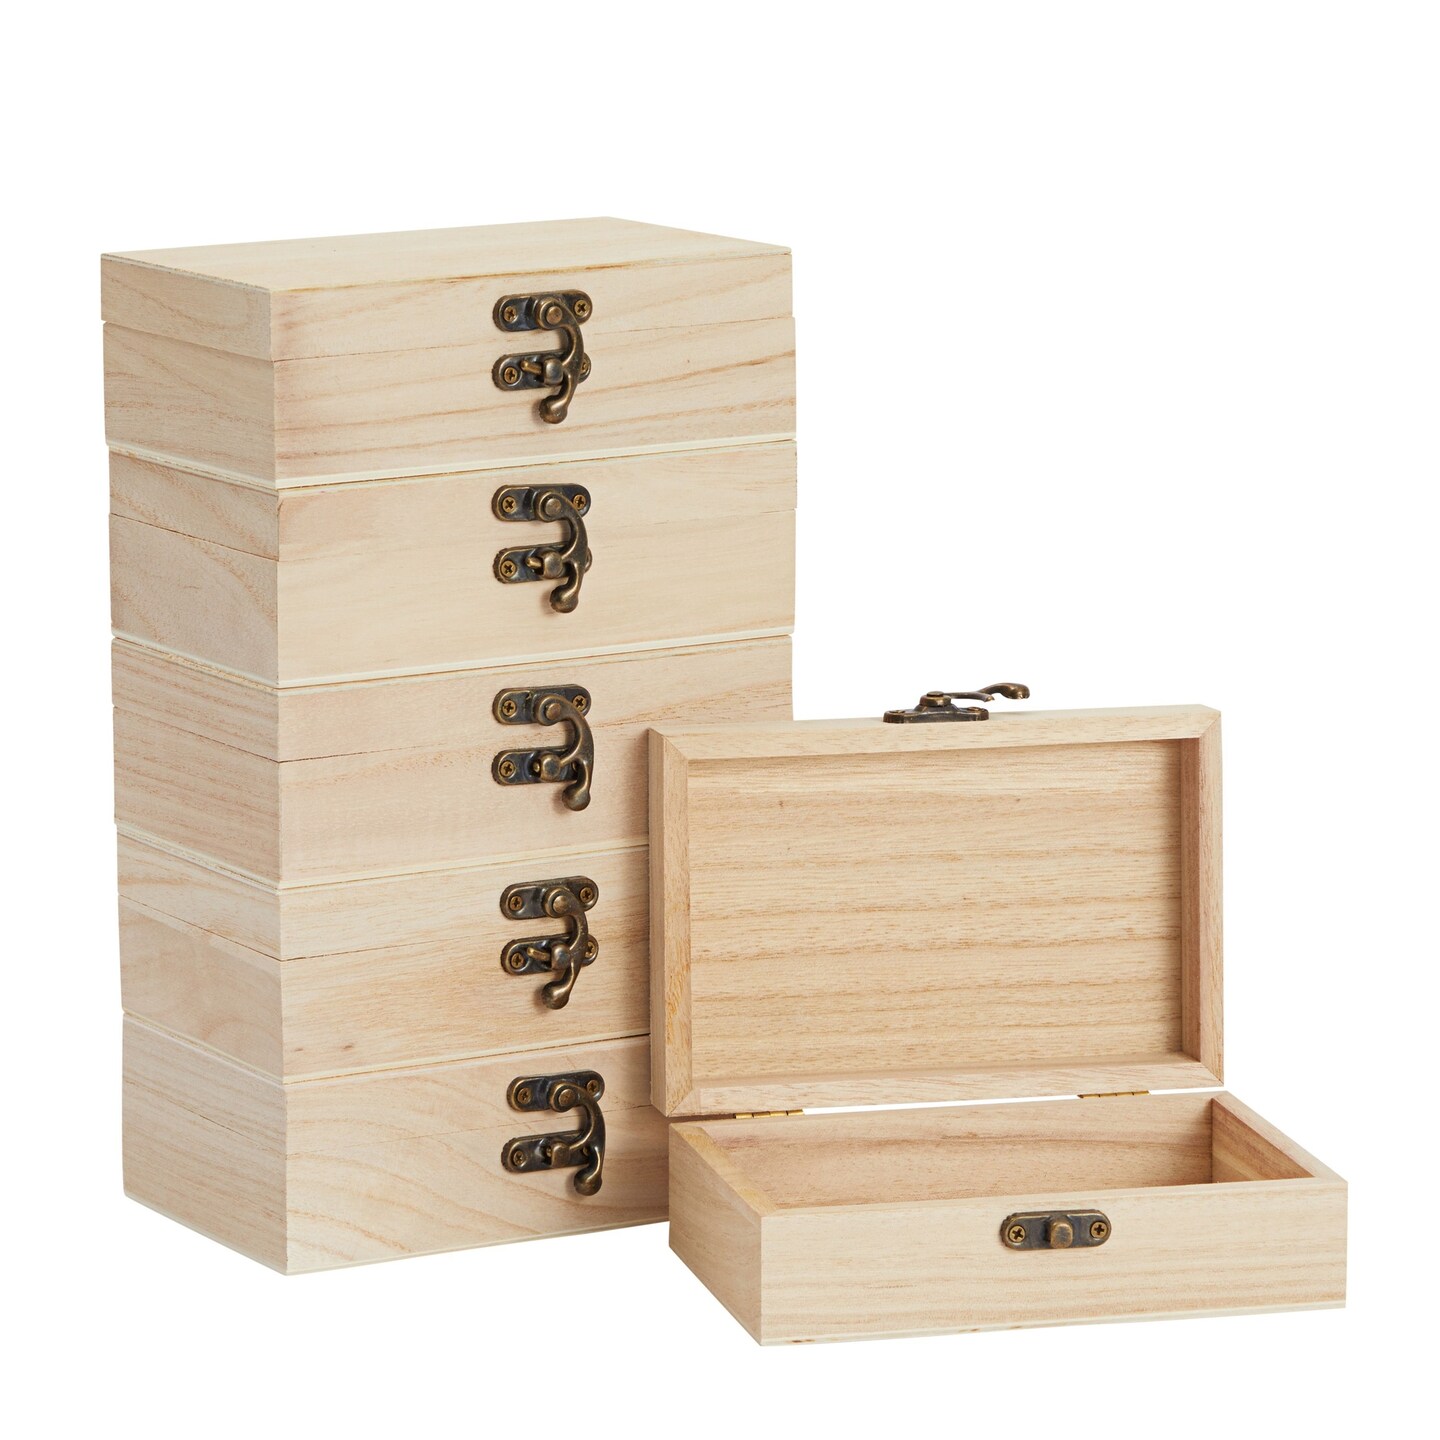 6 Pack Wood Box Small Unfinished with Hinged Lids for Jewelry